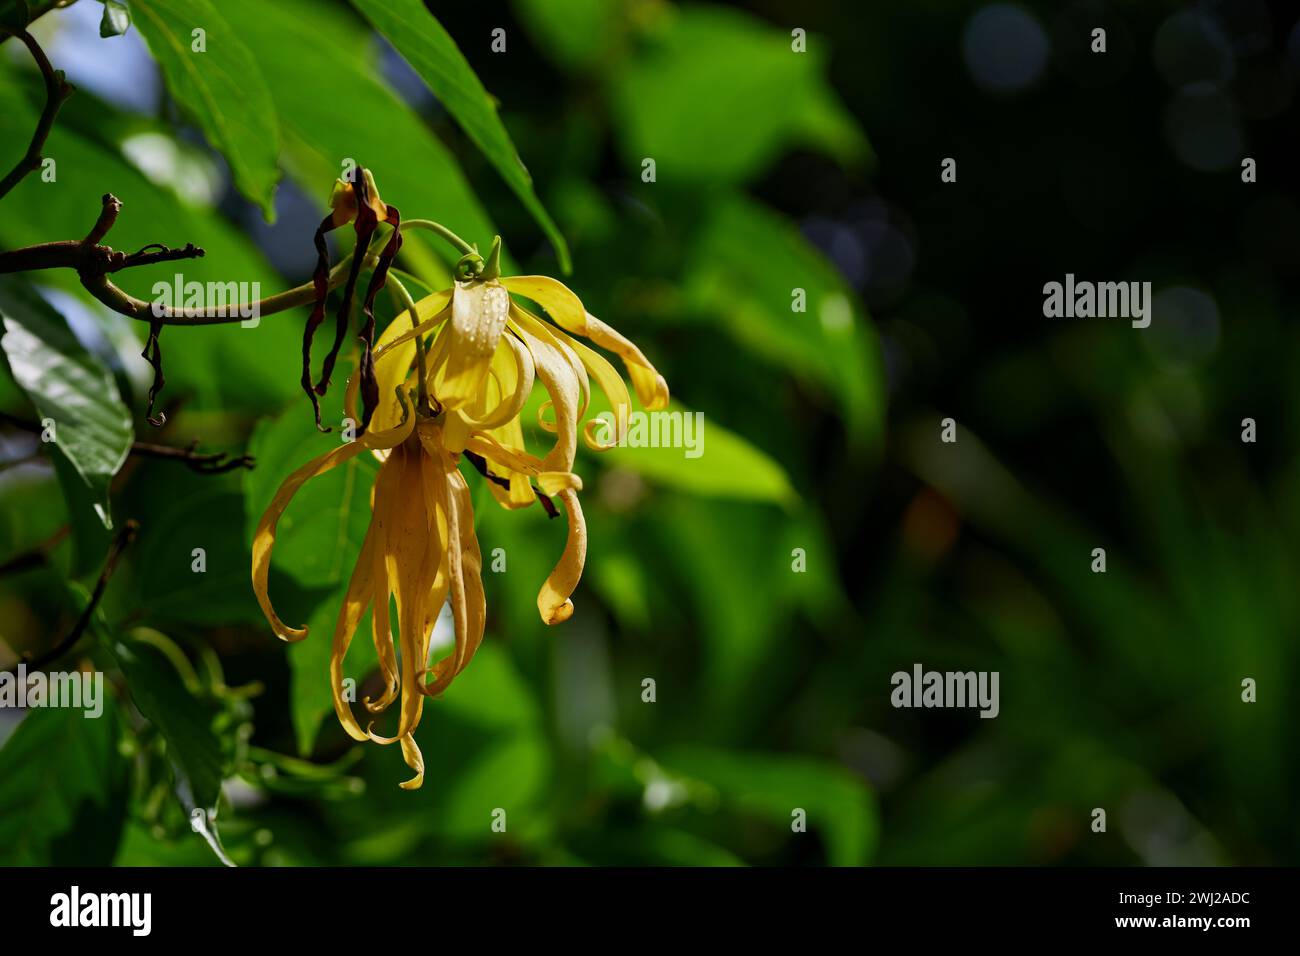 Close-up view of Ylang-ylang flower blooming on tree branch Stock Photo